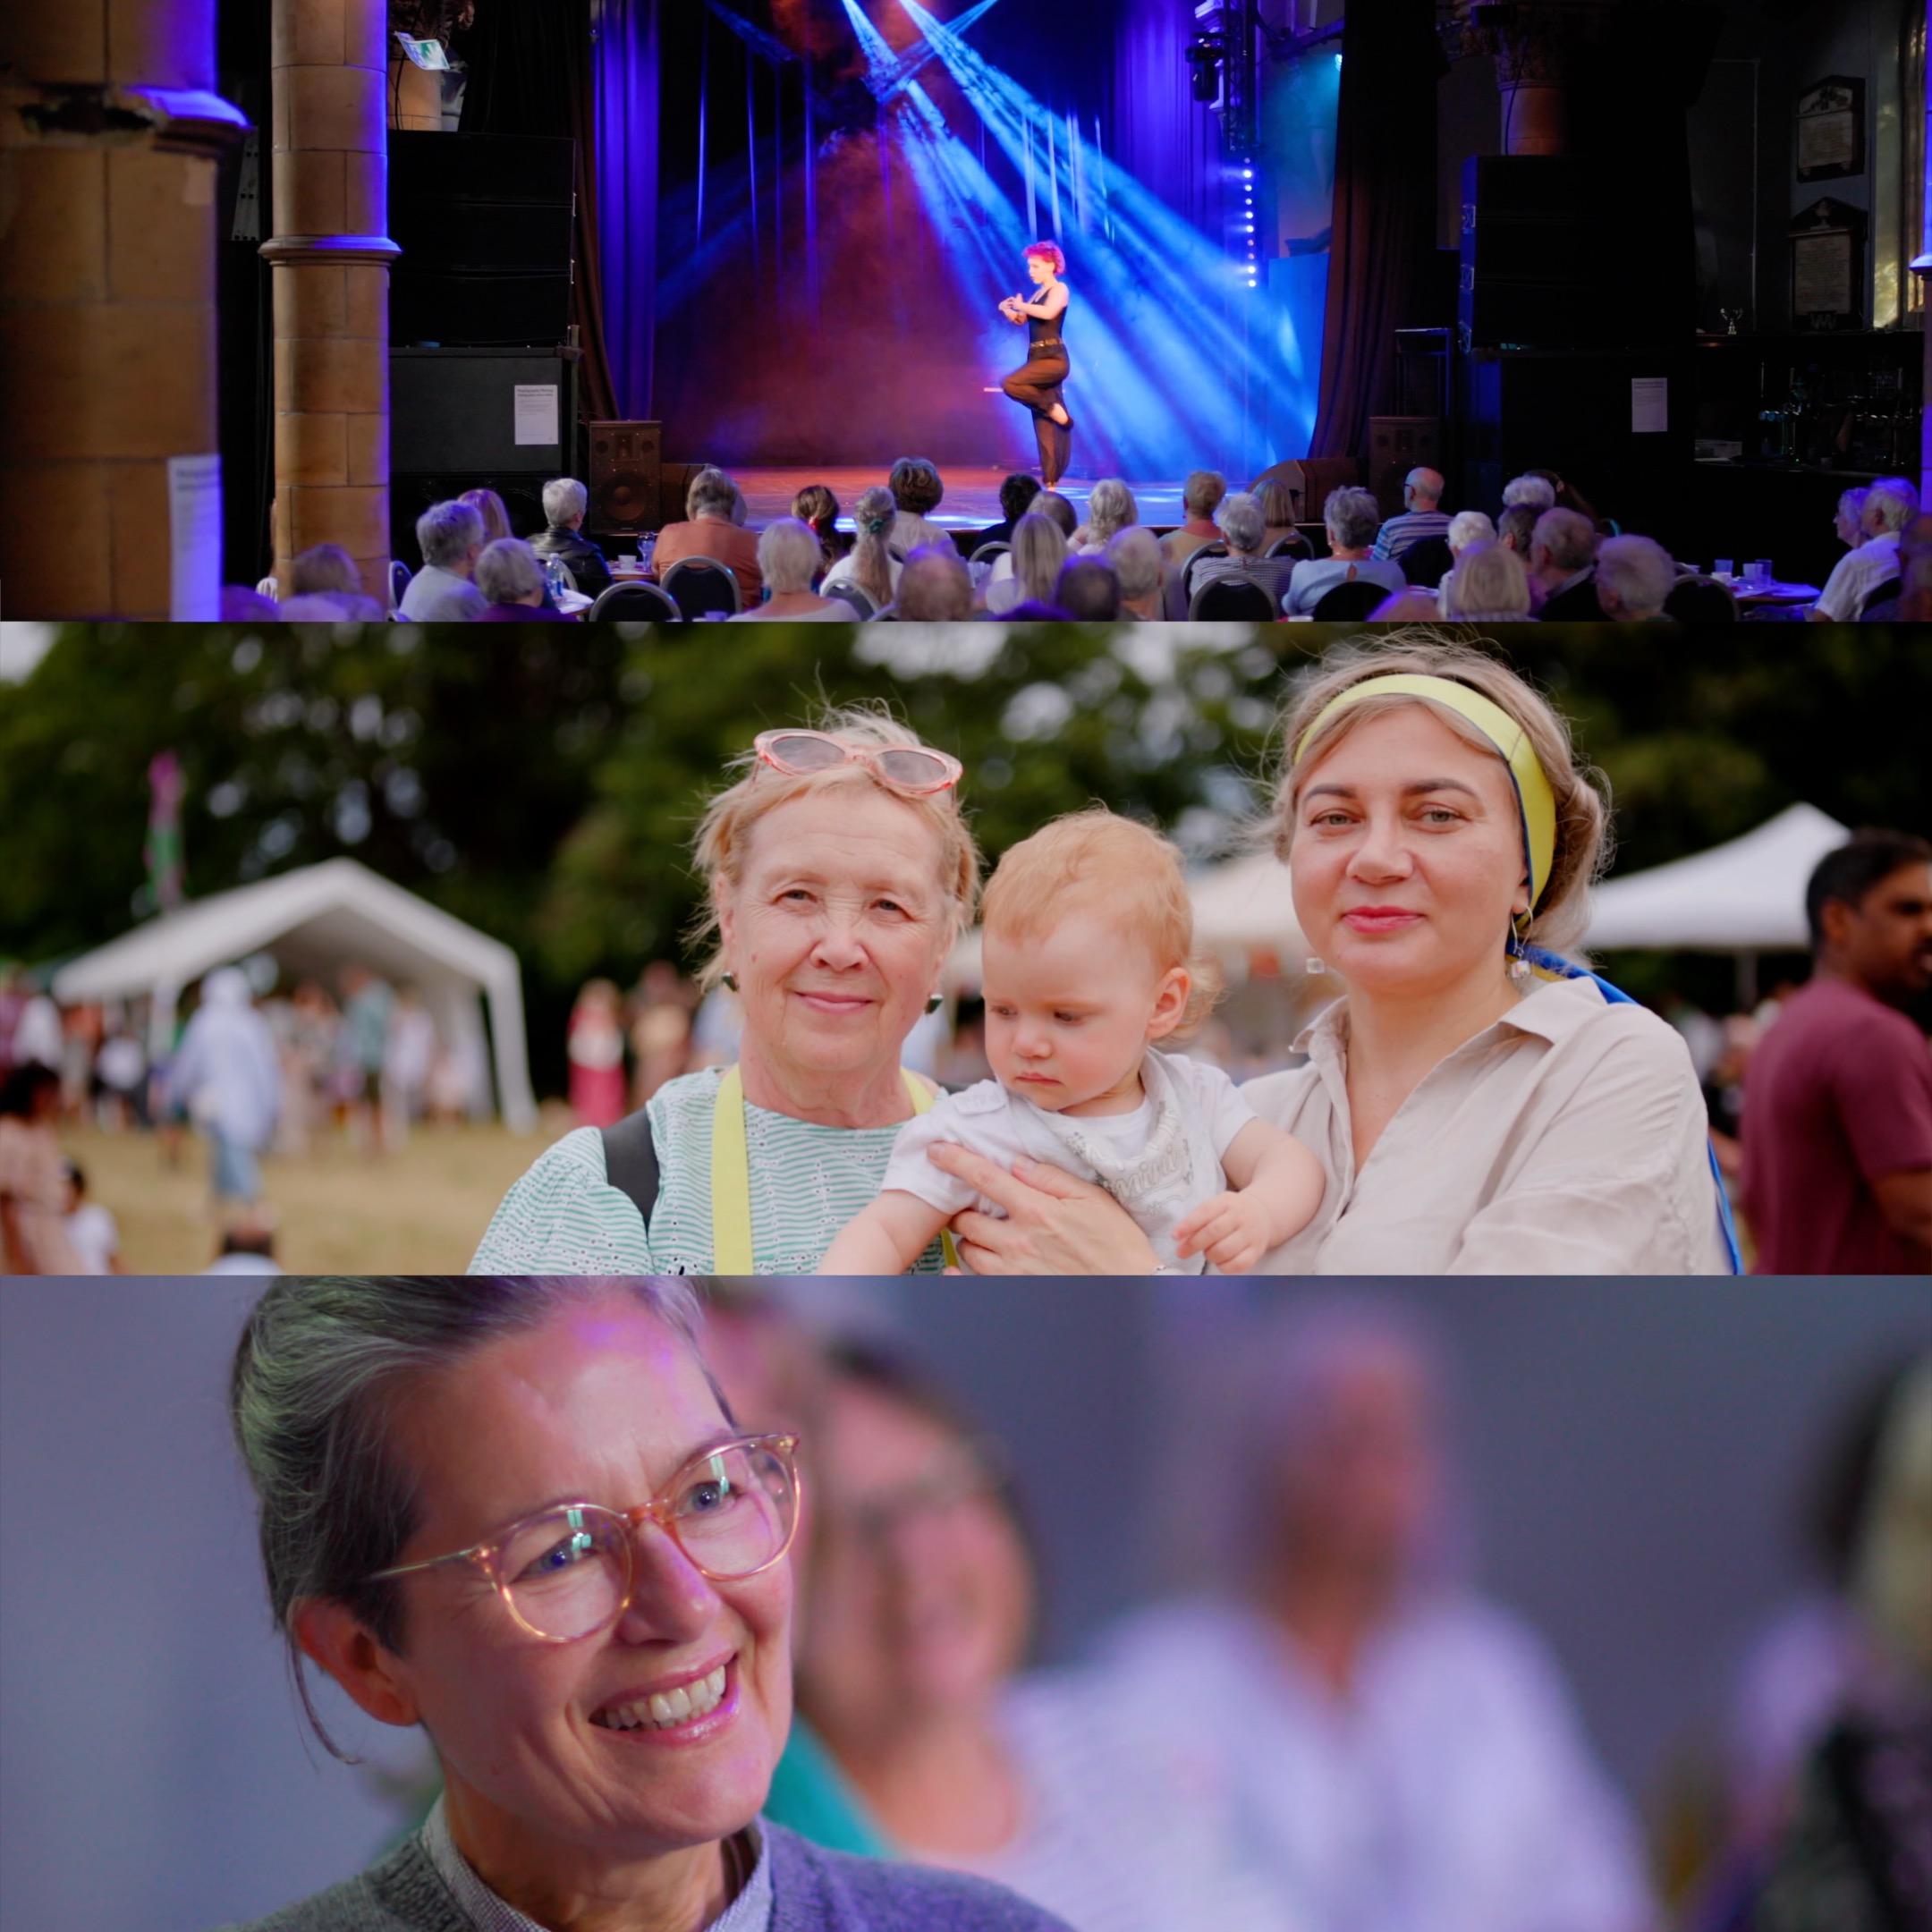 A series of three images showcasing video productions from a dramatic theatrical dance, an audience member and a family consisting of a mother, granddaughter and grandmother looking to camera.